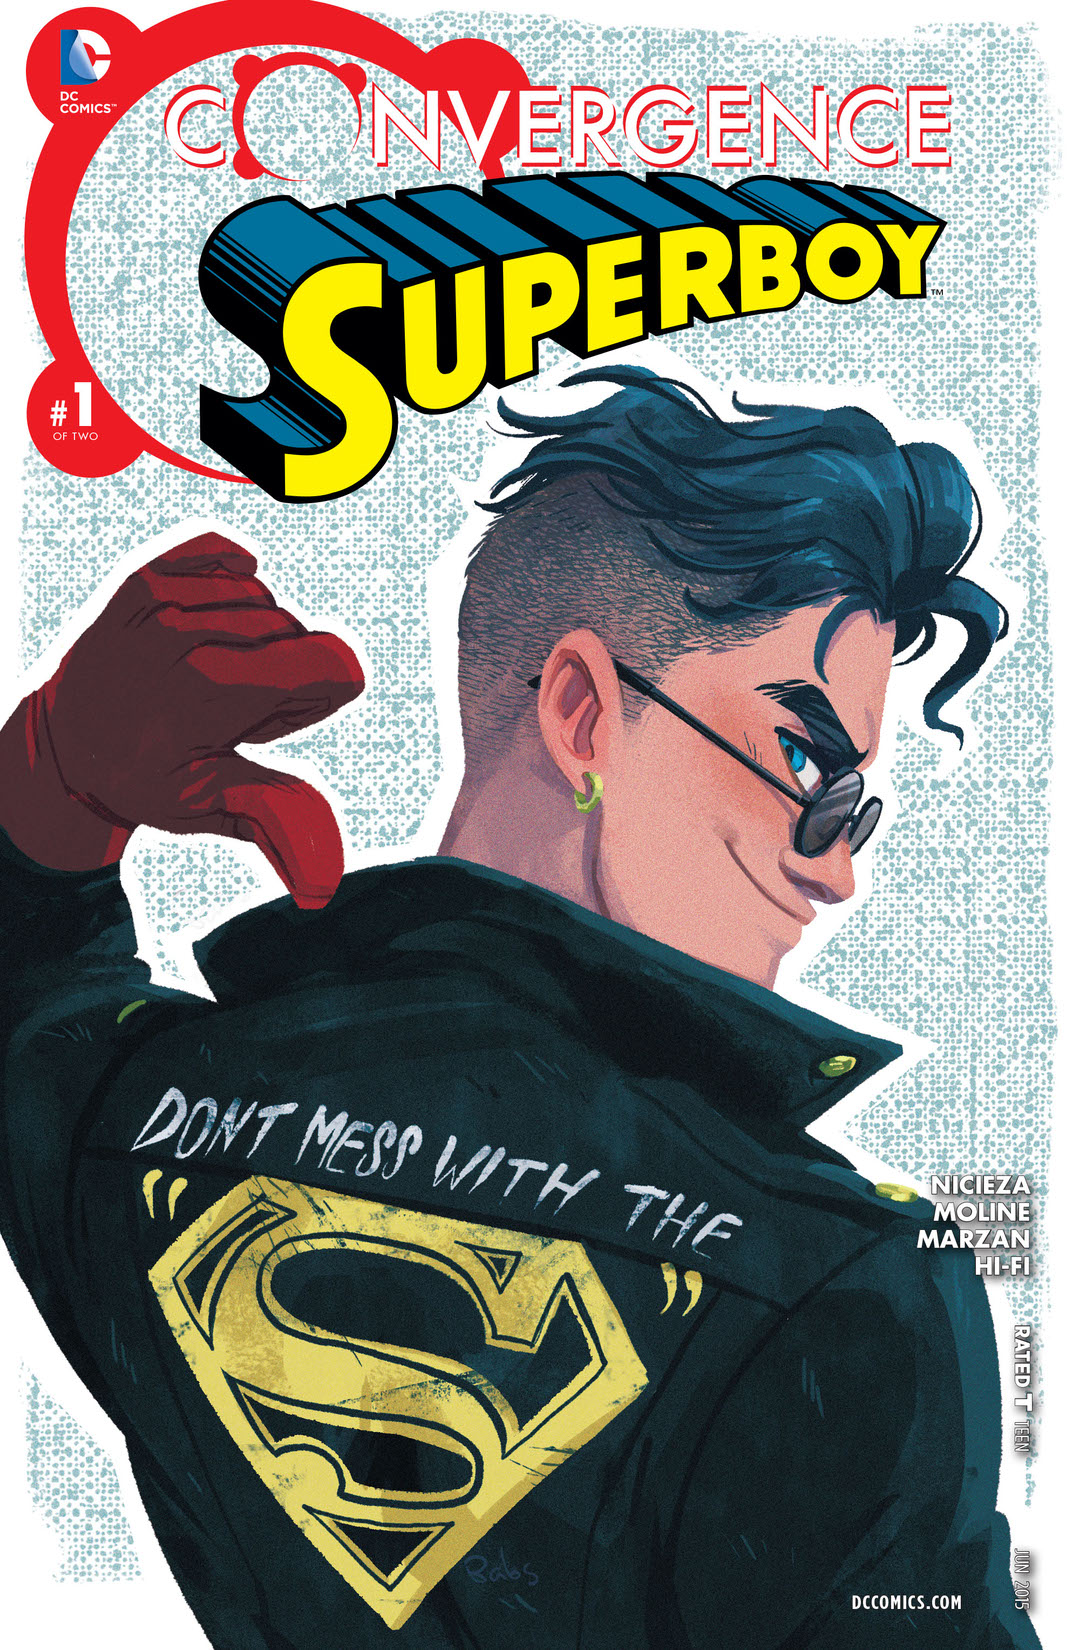 Convergence: Superboy #1 preview images